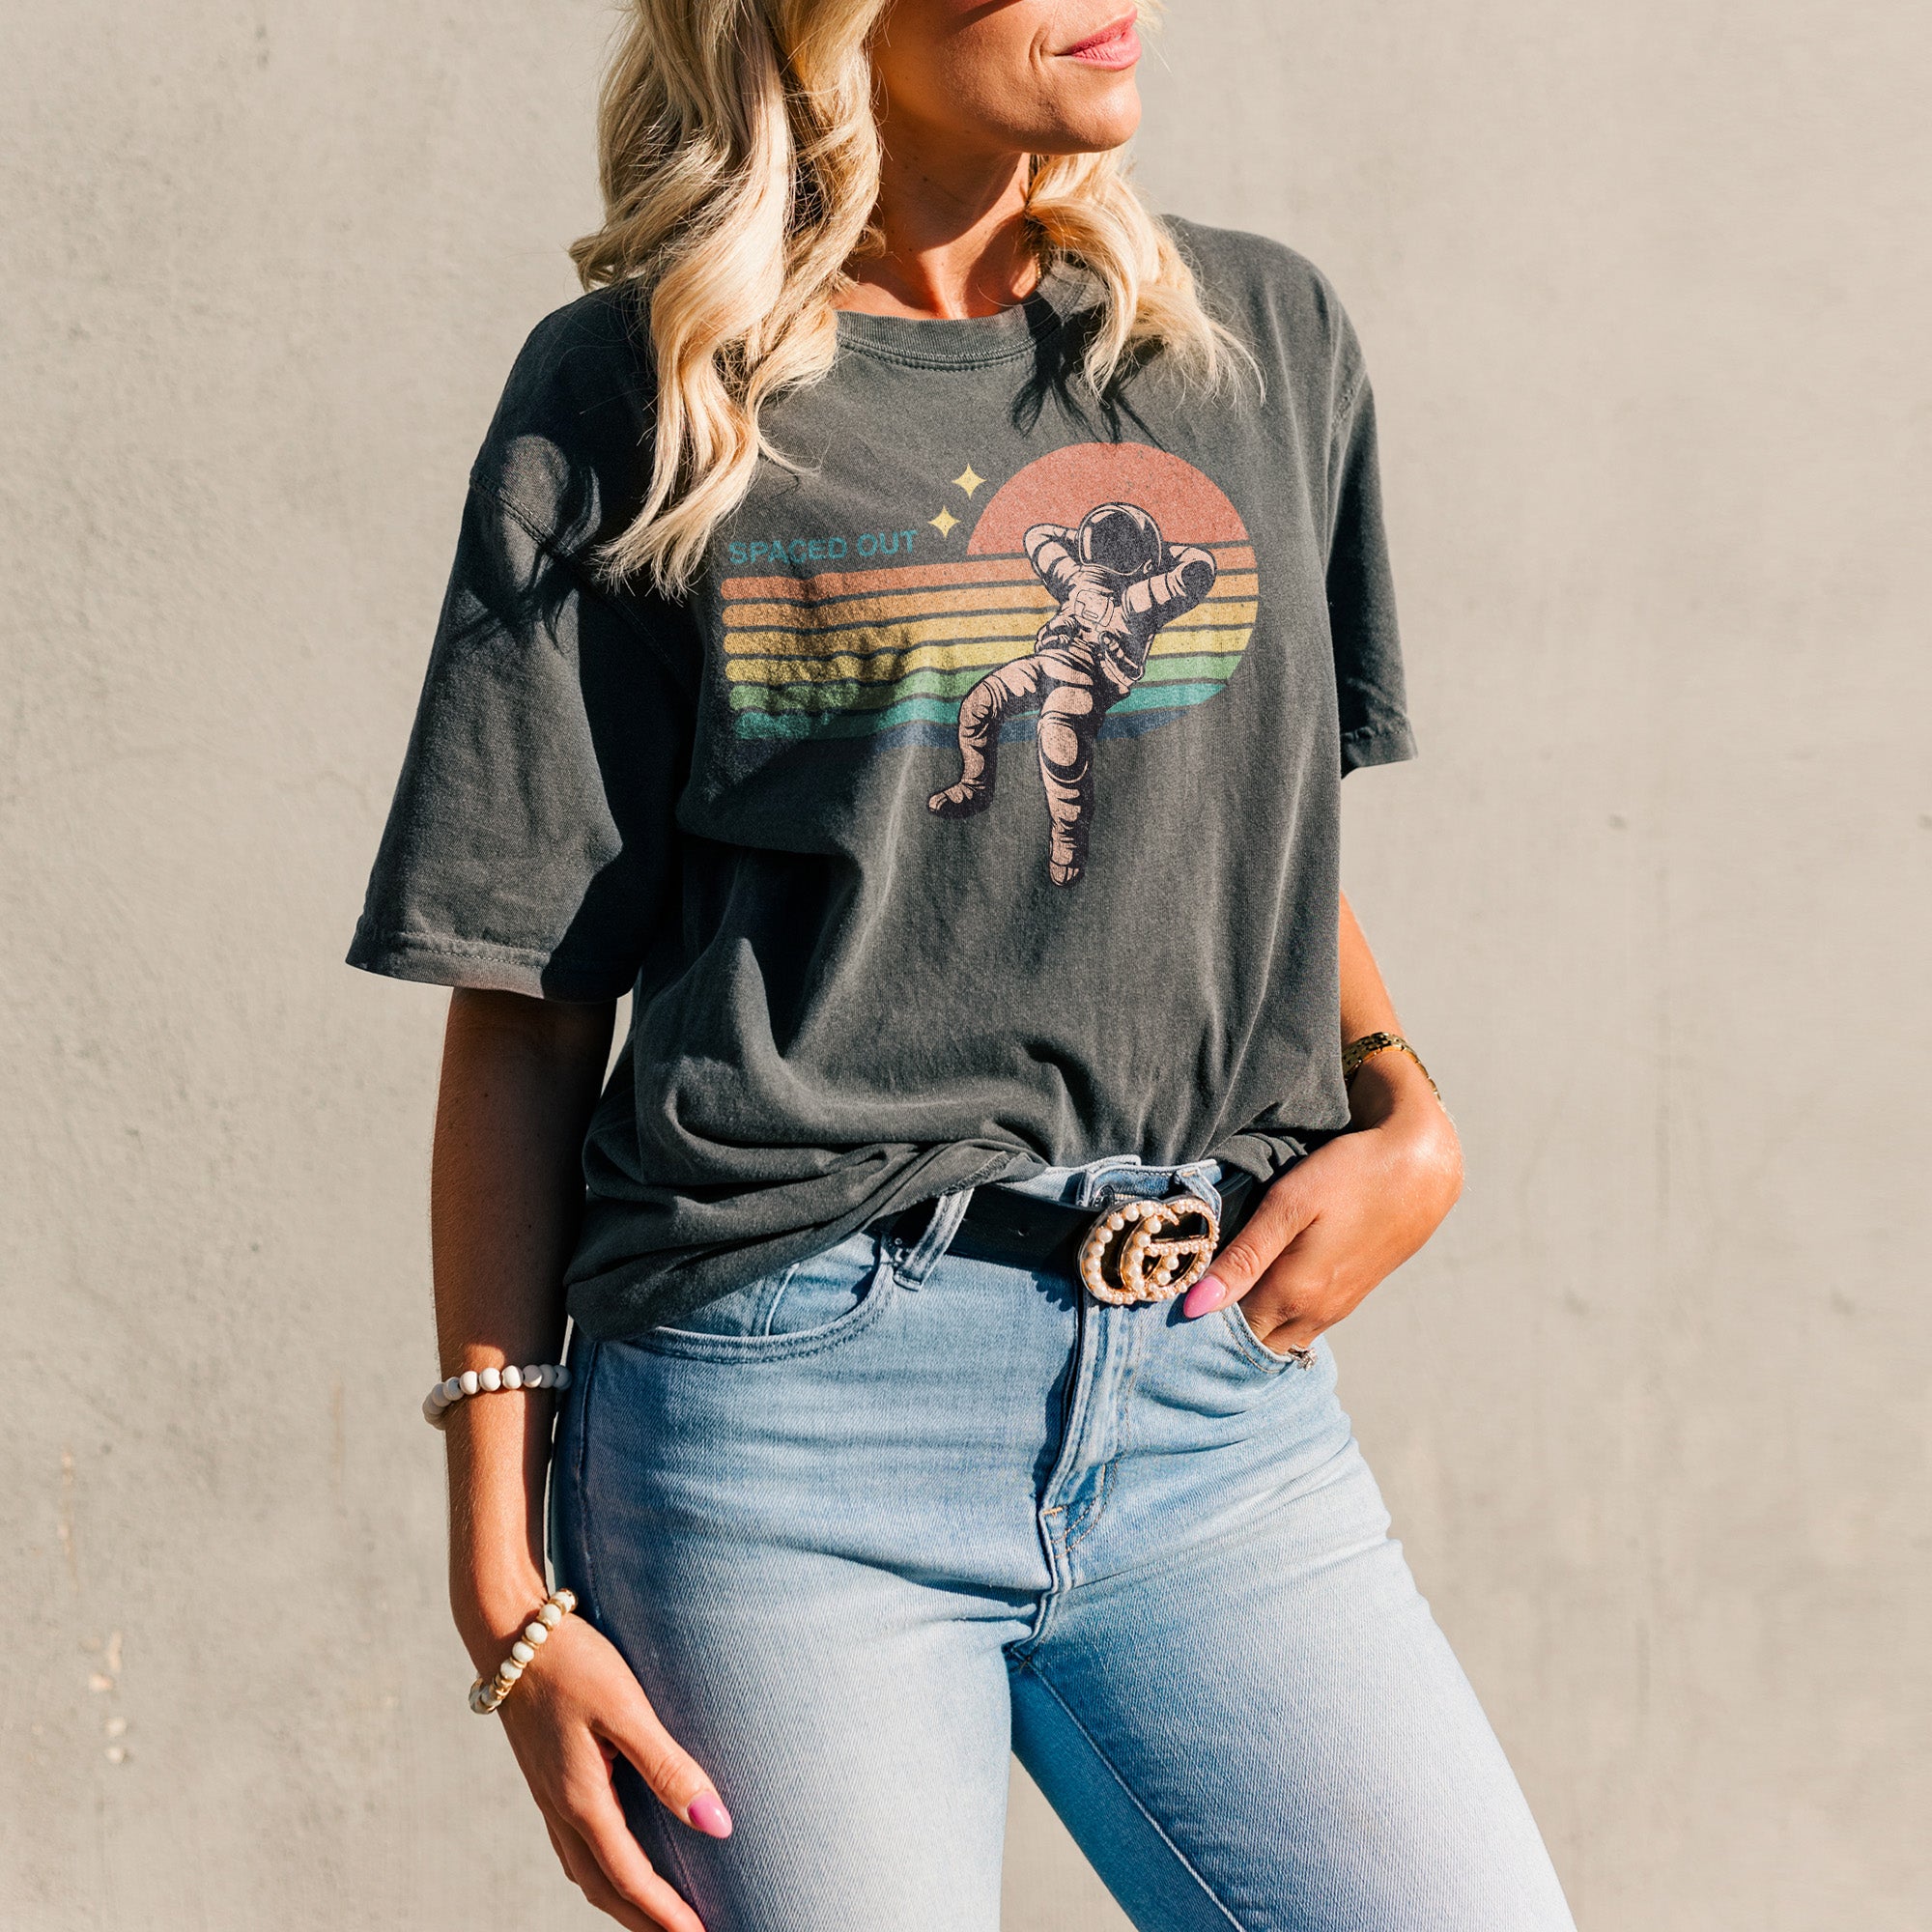 Spaced Out Oversized Shirt for Women Garment-Dyed Graphic Tee